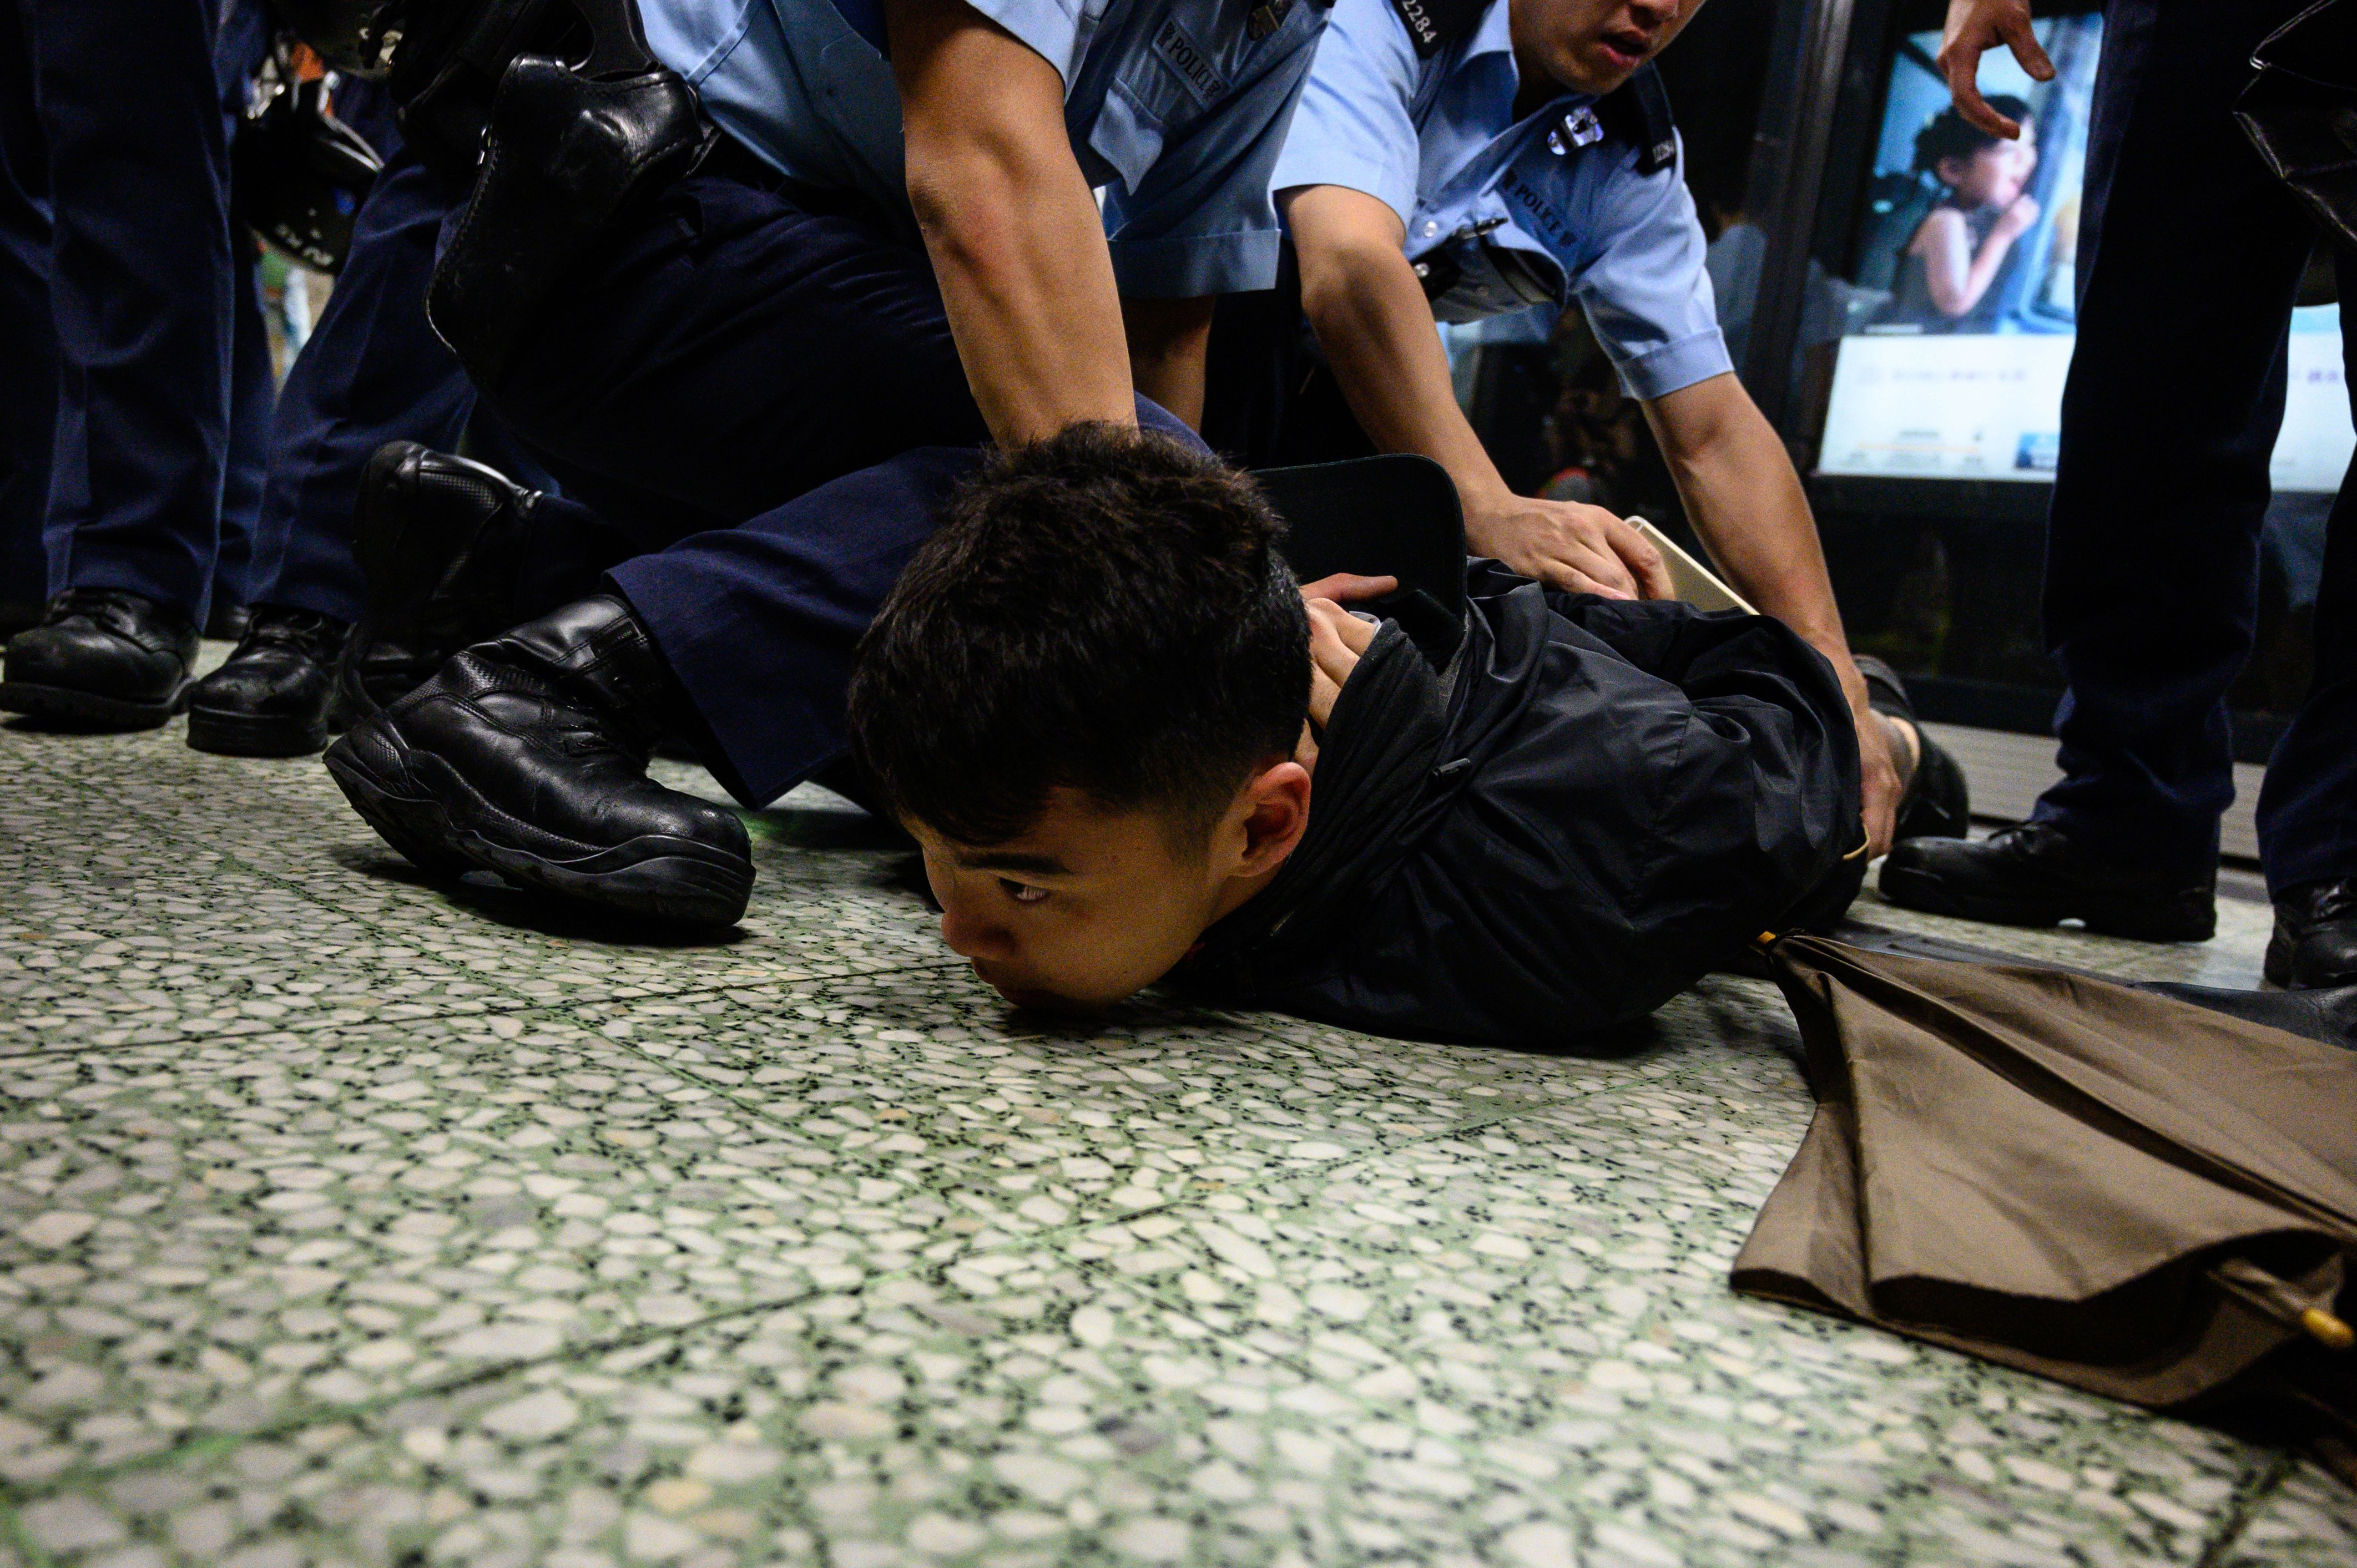 A man is arrested at the Lok Fu MTR station during a train disruption protest.